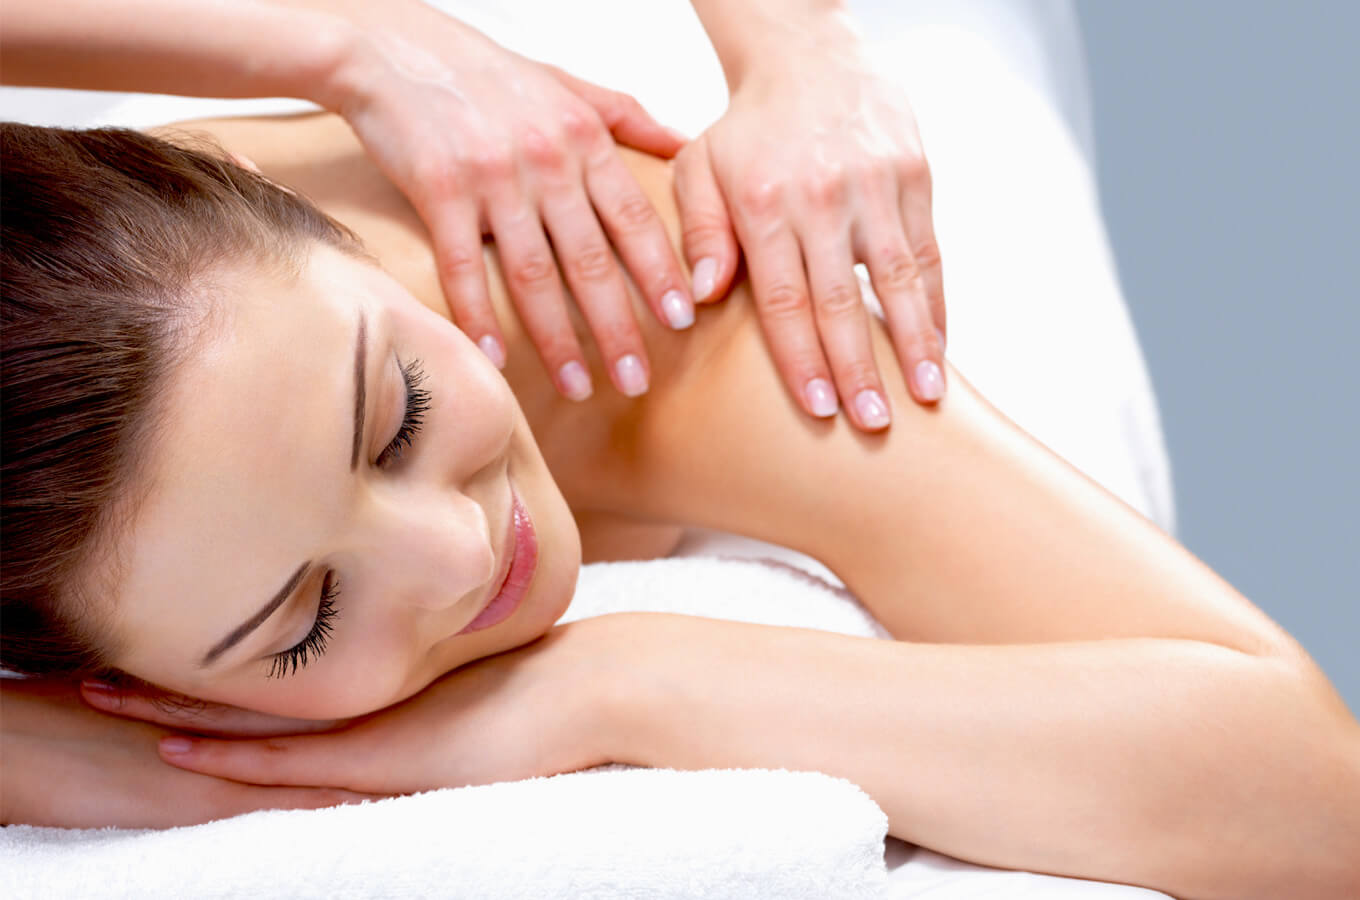 Get a Professional Massage In Singapore Today